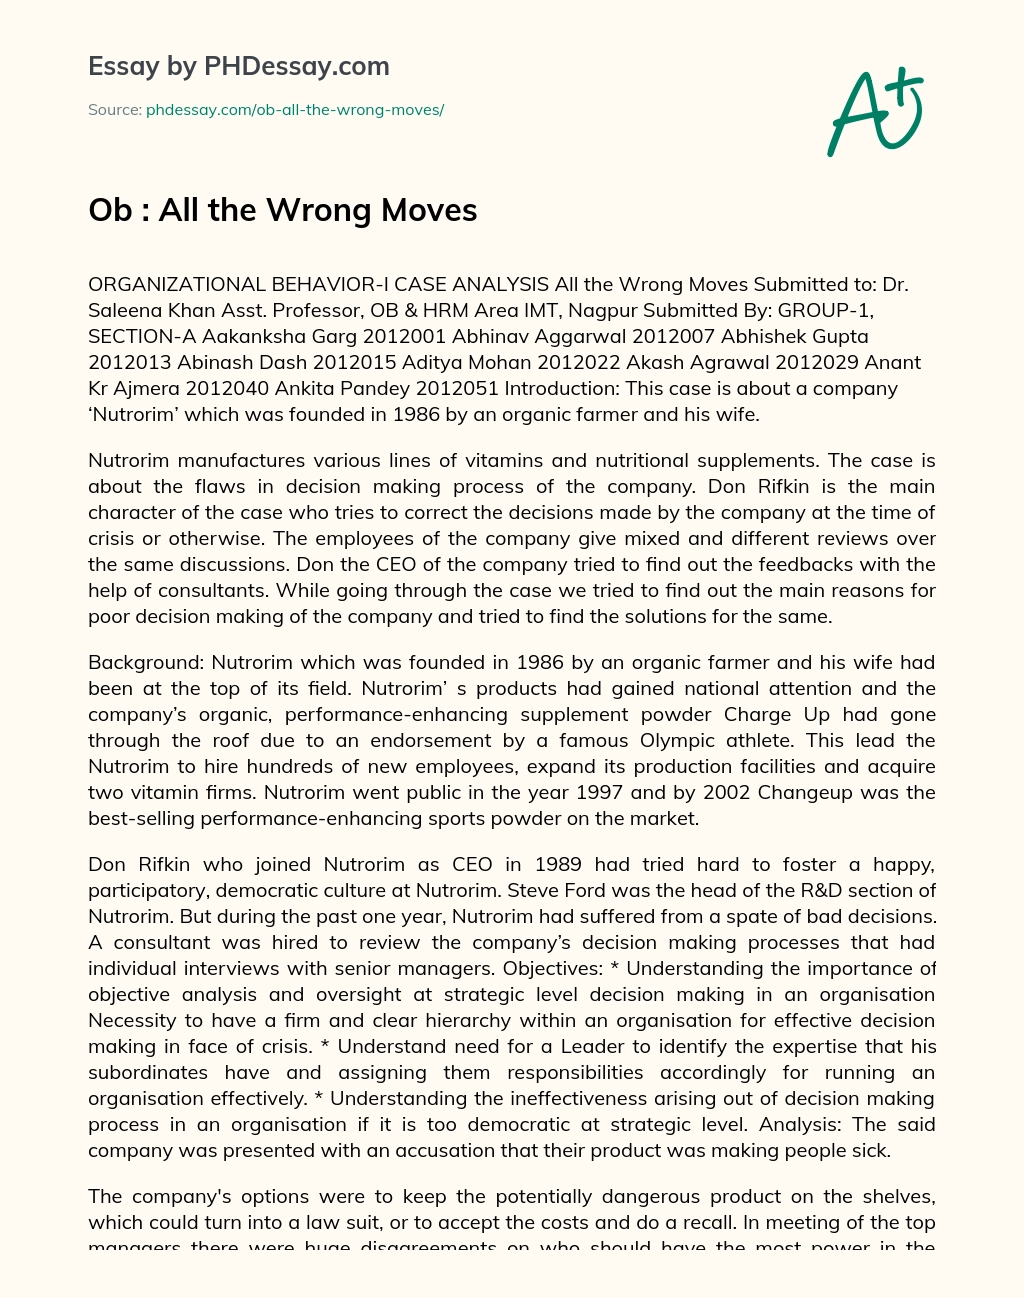 Ob : All the Wrong Moves essay